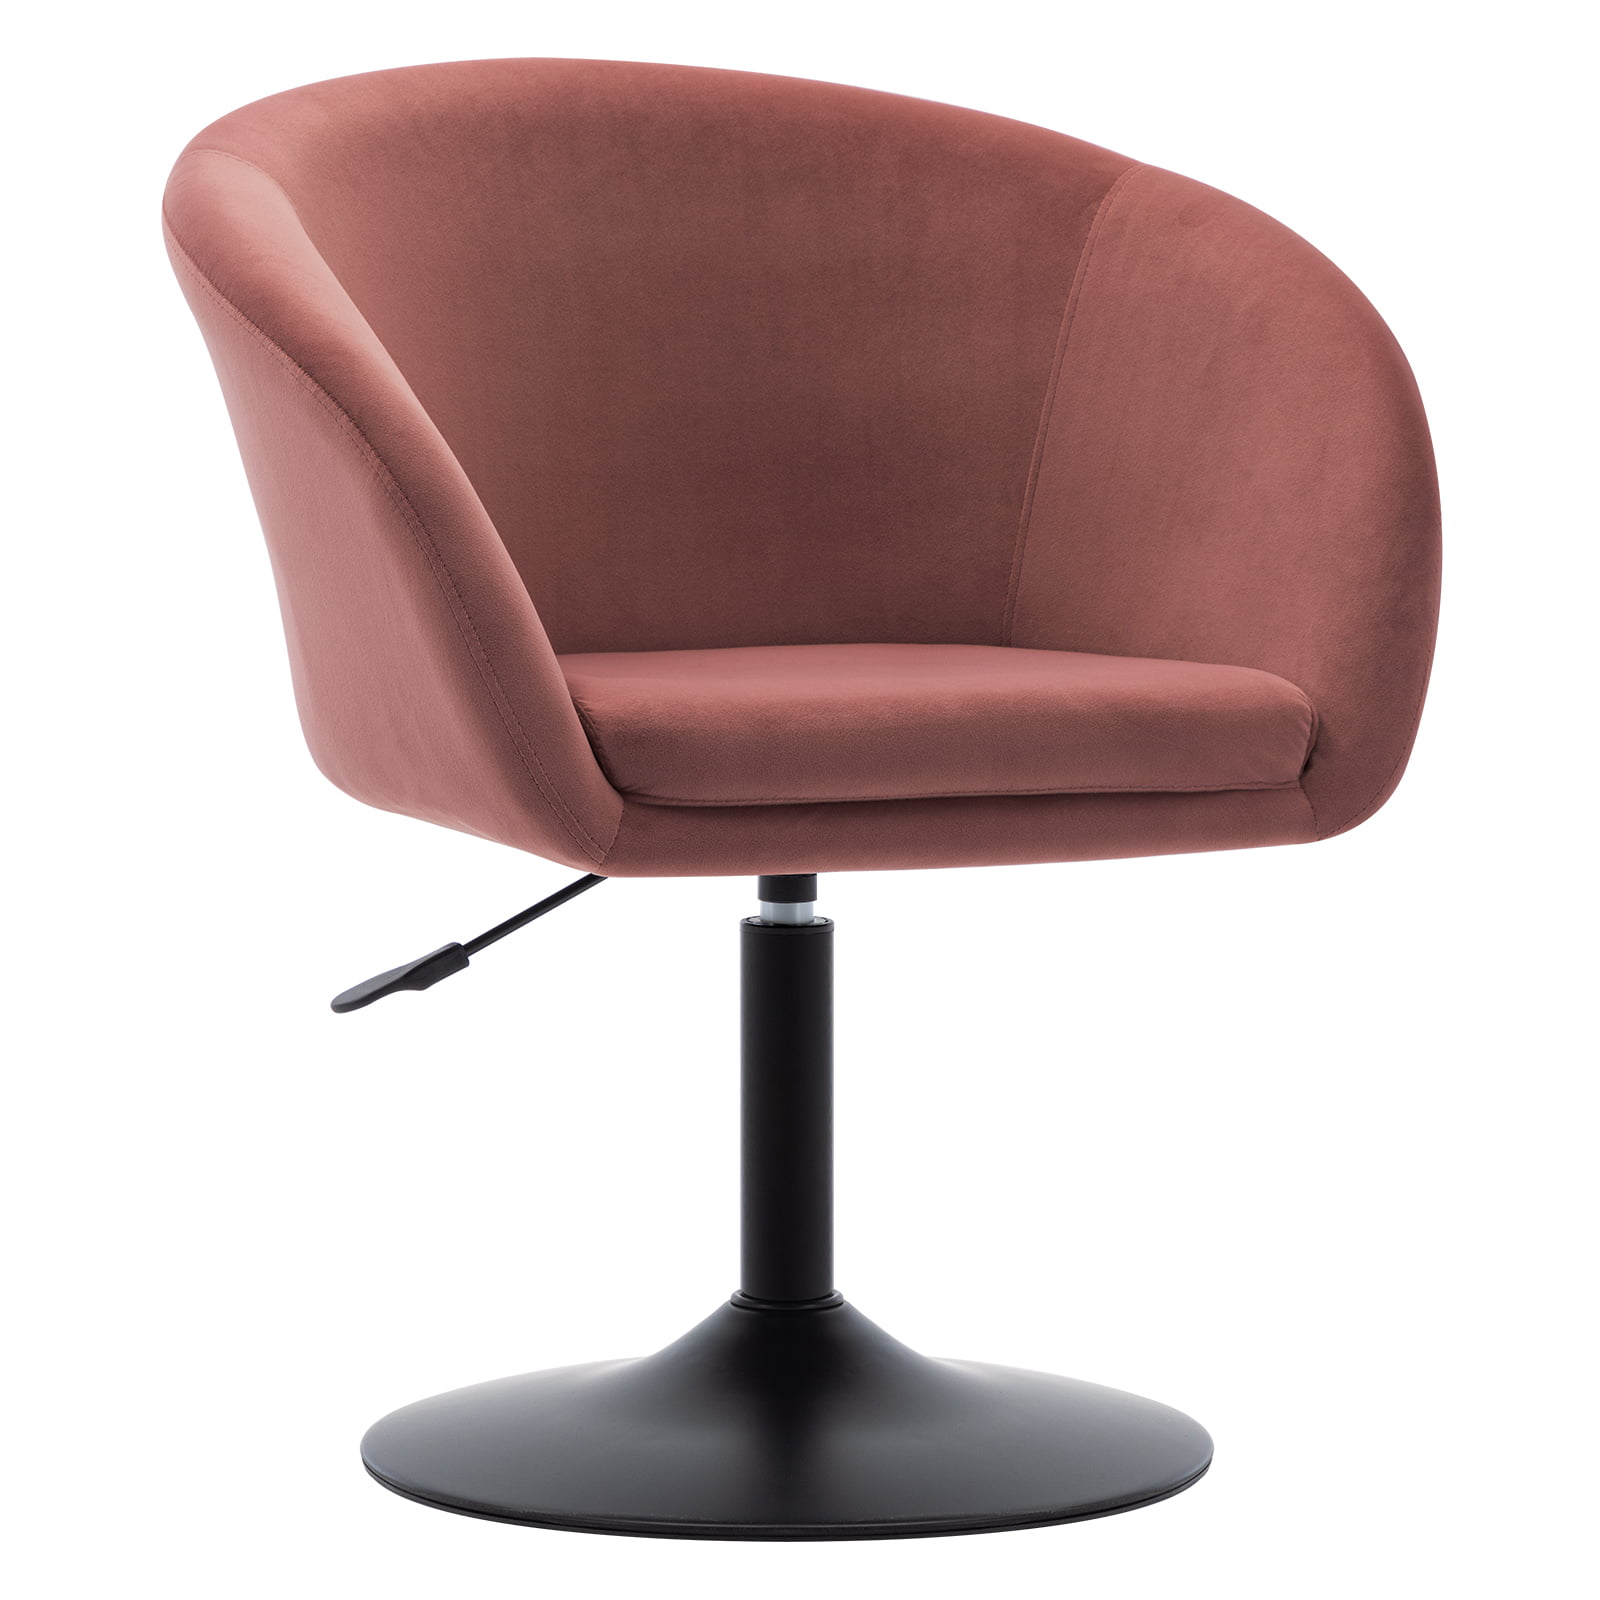 Details about   Adjustable Round Back Swivel Chair Back Accent Modern Leather Vanity Black 